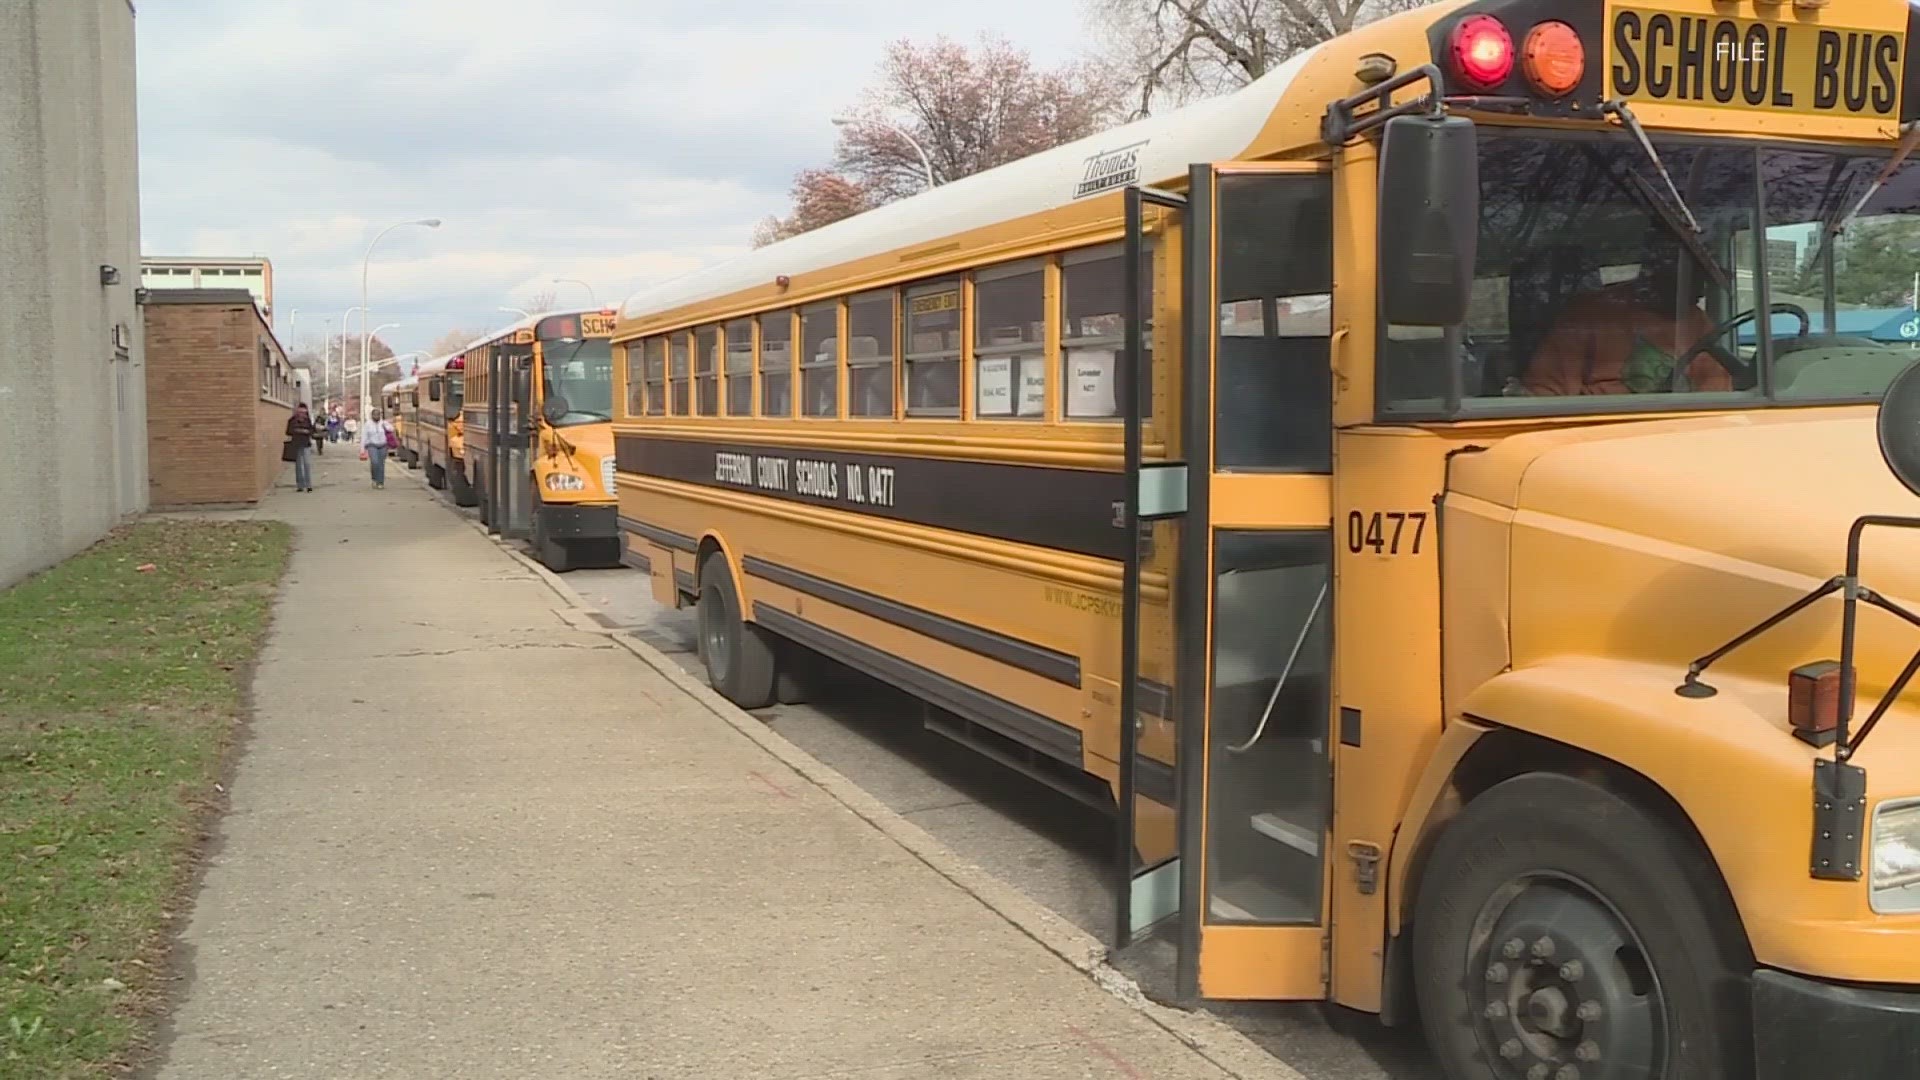 House Bill 447 hopes to get students home from school quicker and will allow school employees to drive students home in nine-passenger vans.